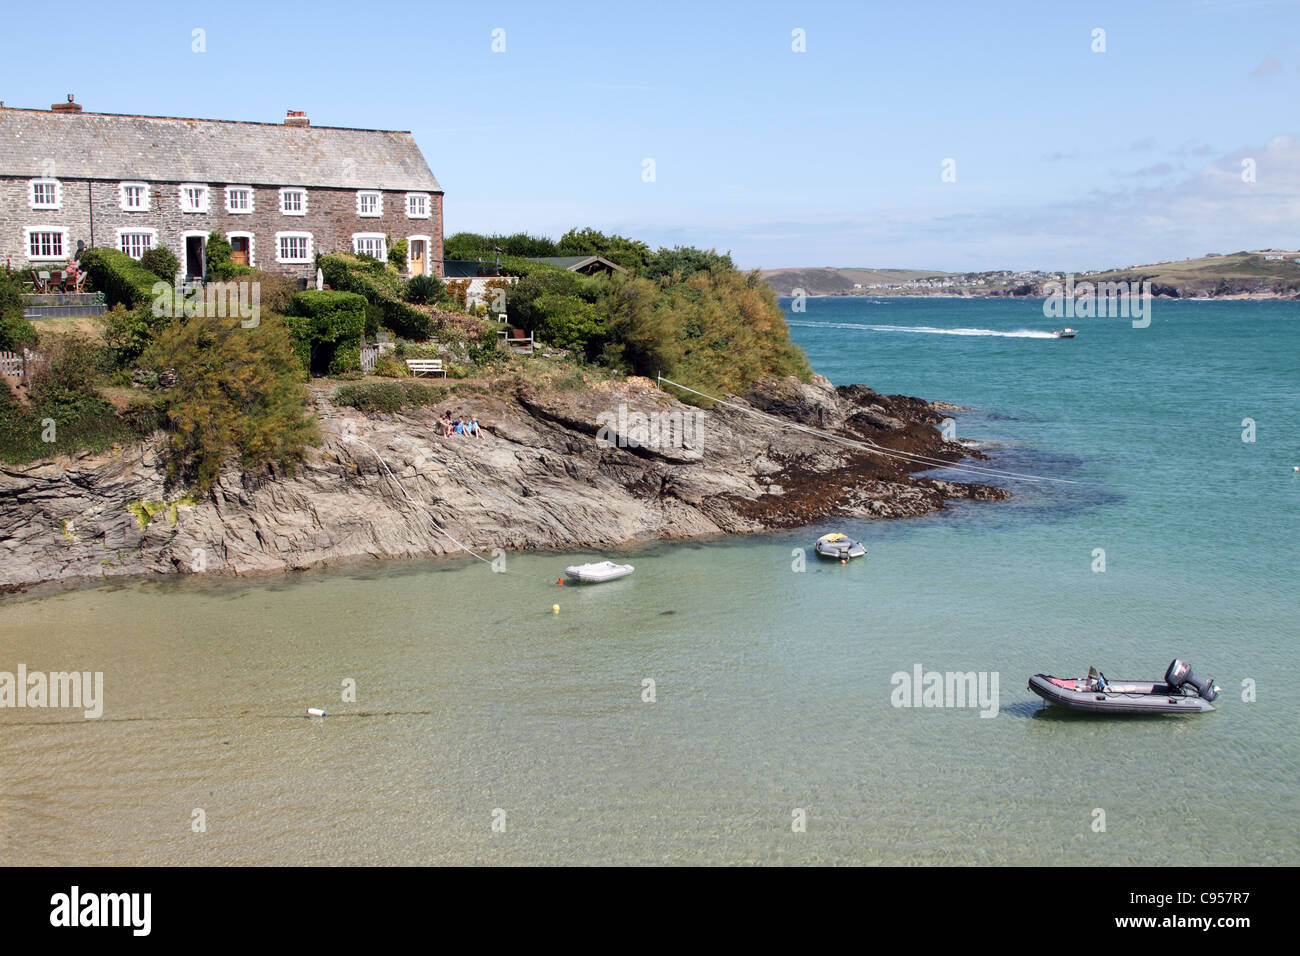 Hawker's Cove ; Padstow Cornwall ; Royaume-Uni ; Banque D'Images